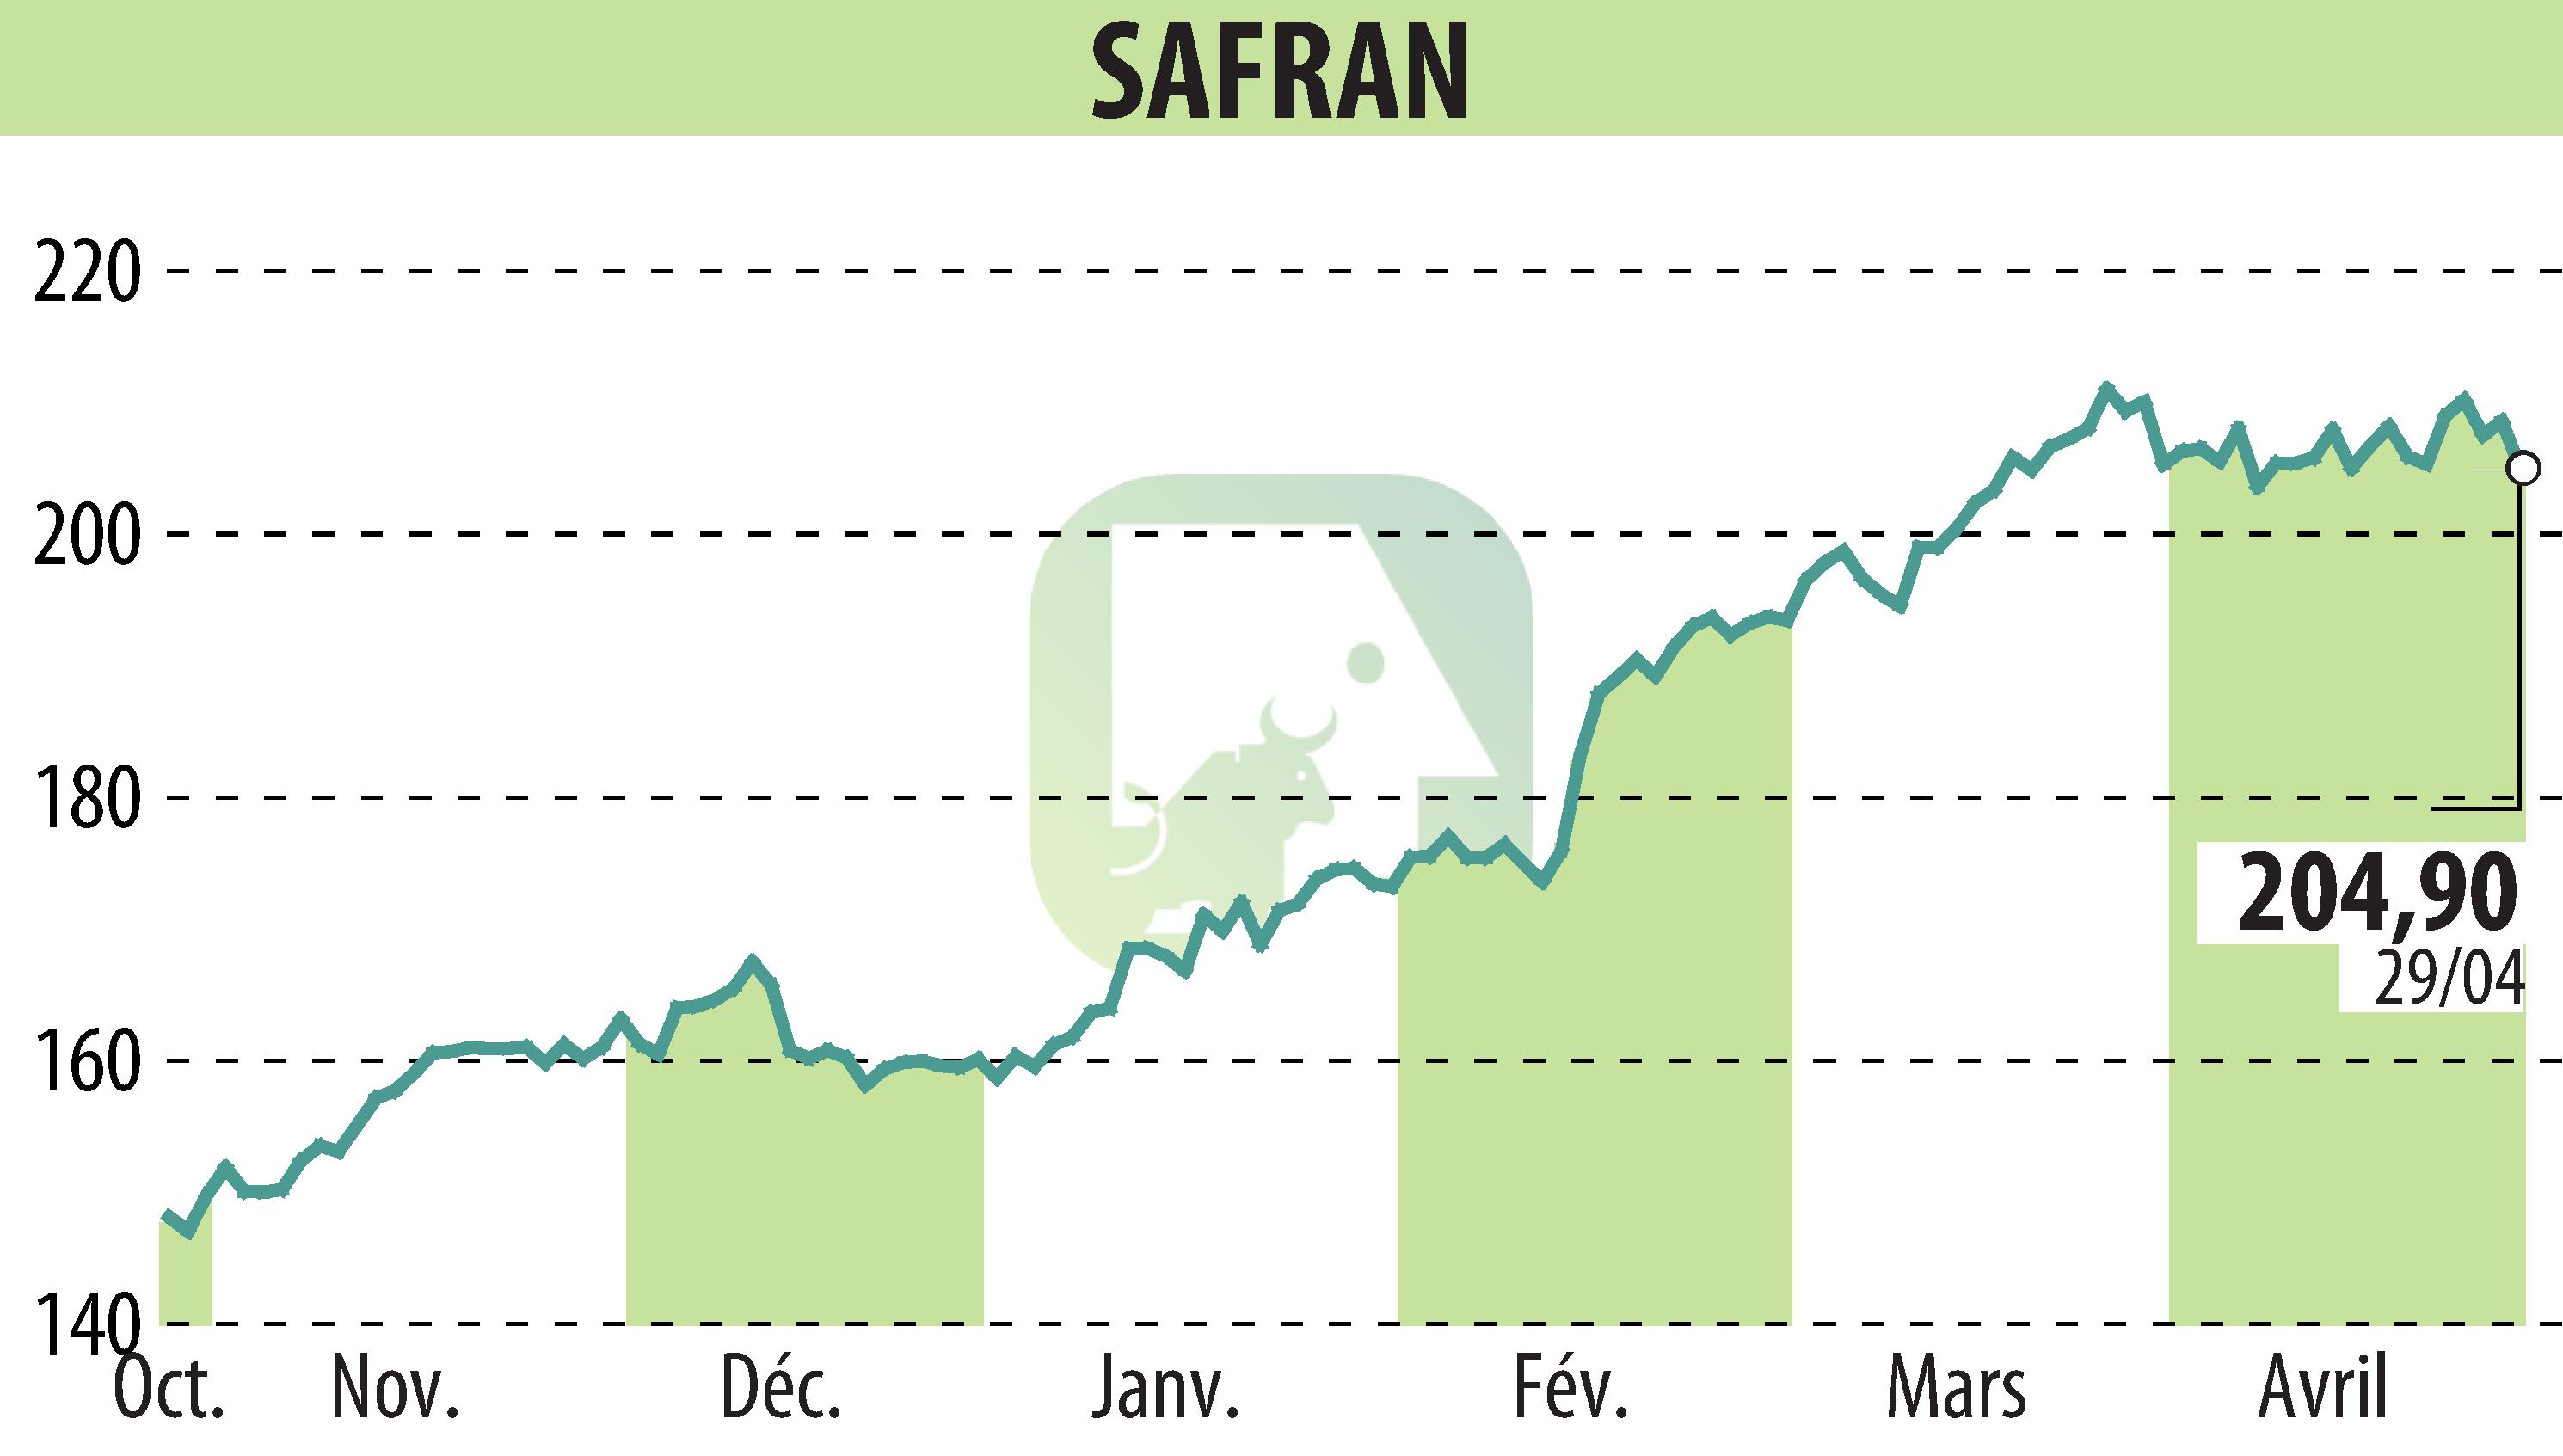 Stock price chart of SAFRAN (EPA:SAF) showing fluctuations.